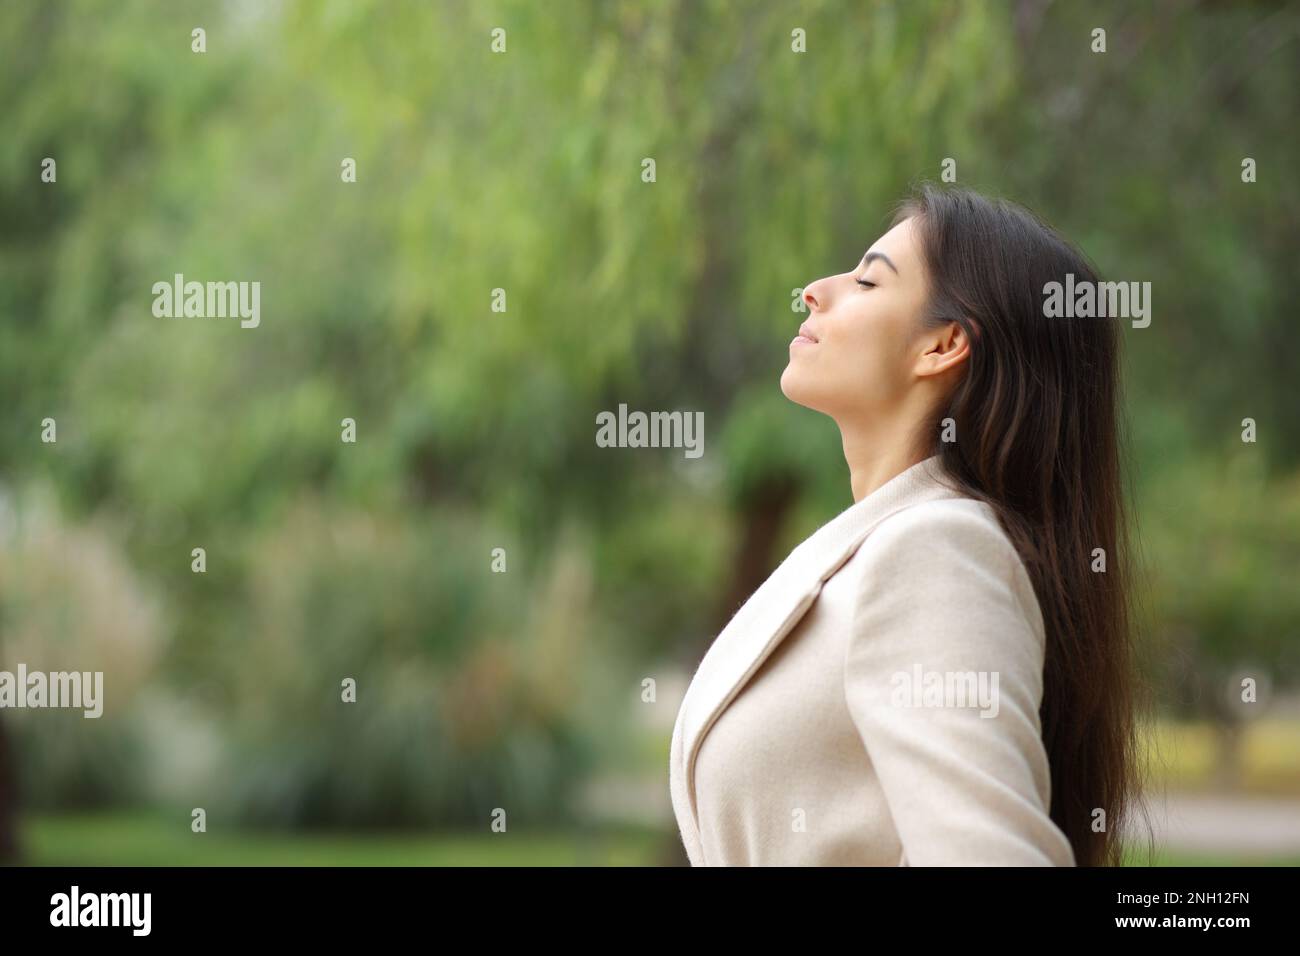 Side view portrait of a woman breathing in a park in winter Stock Photo